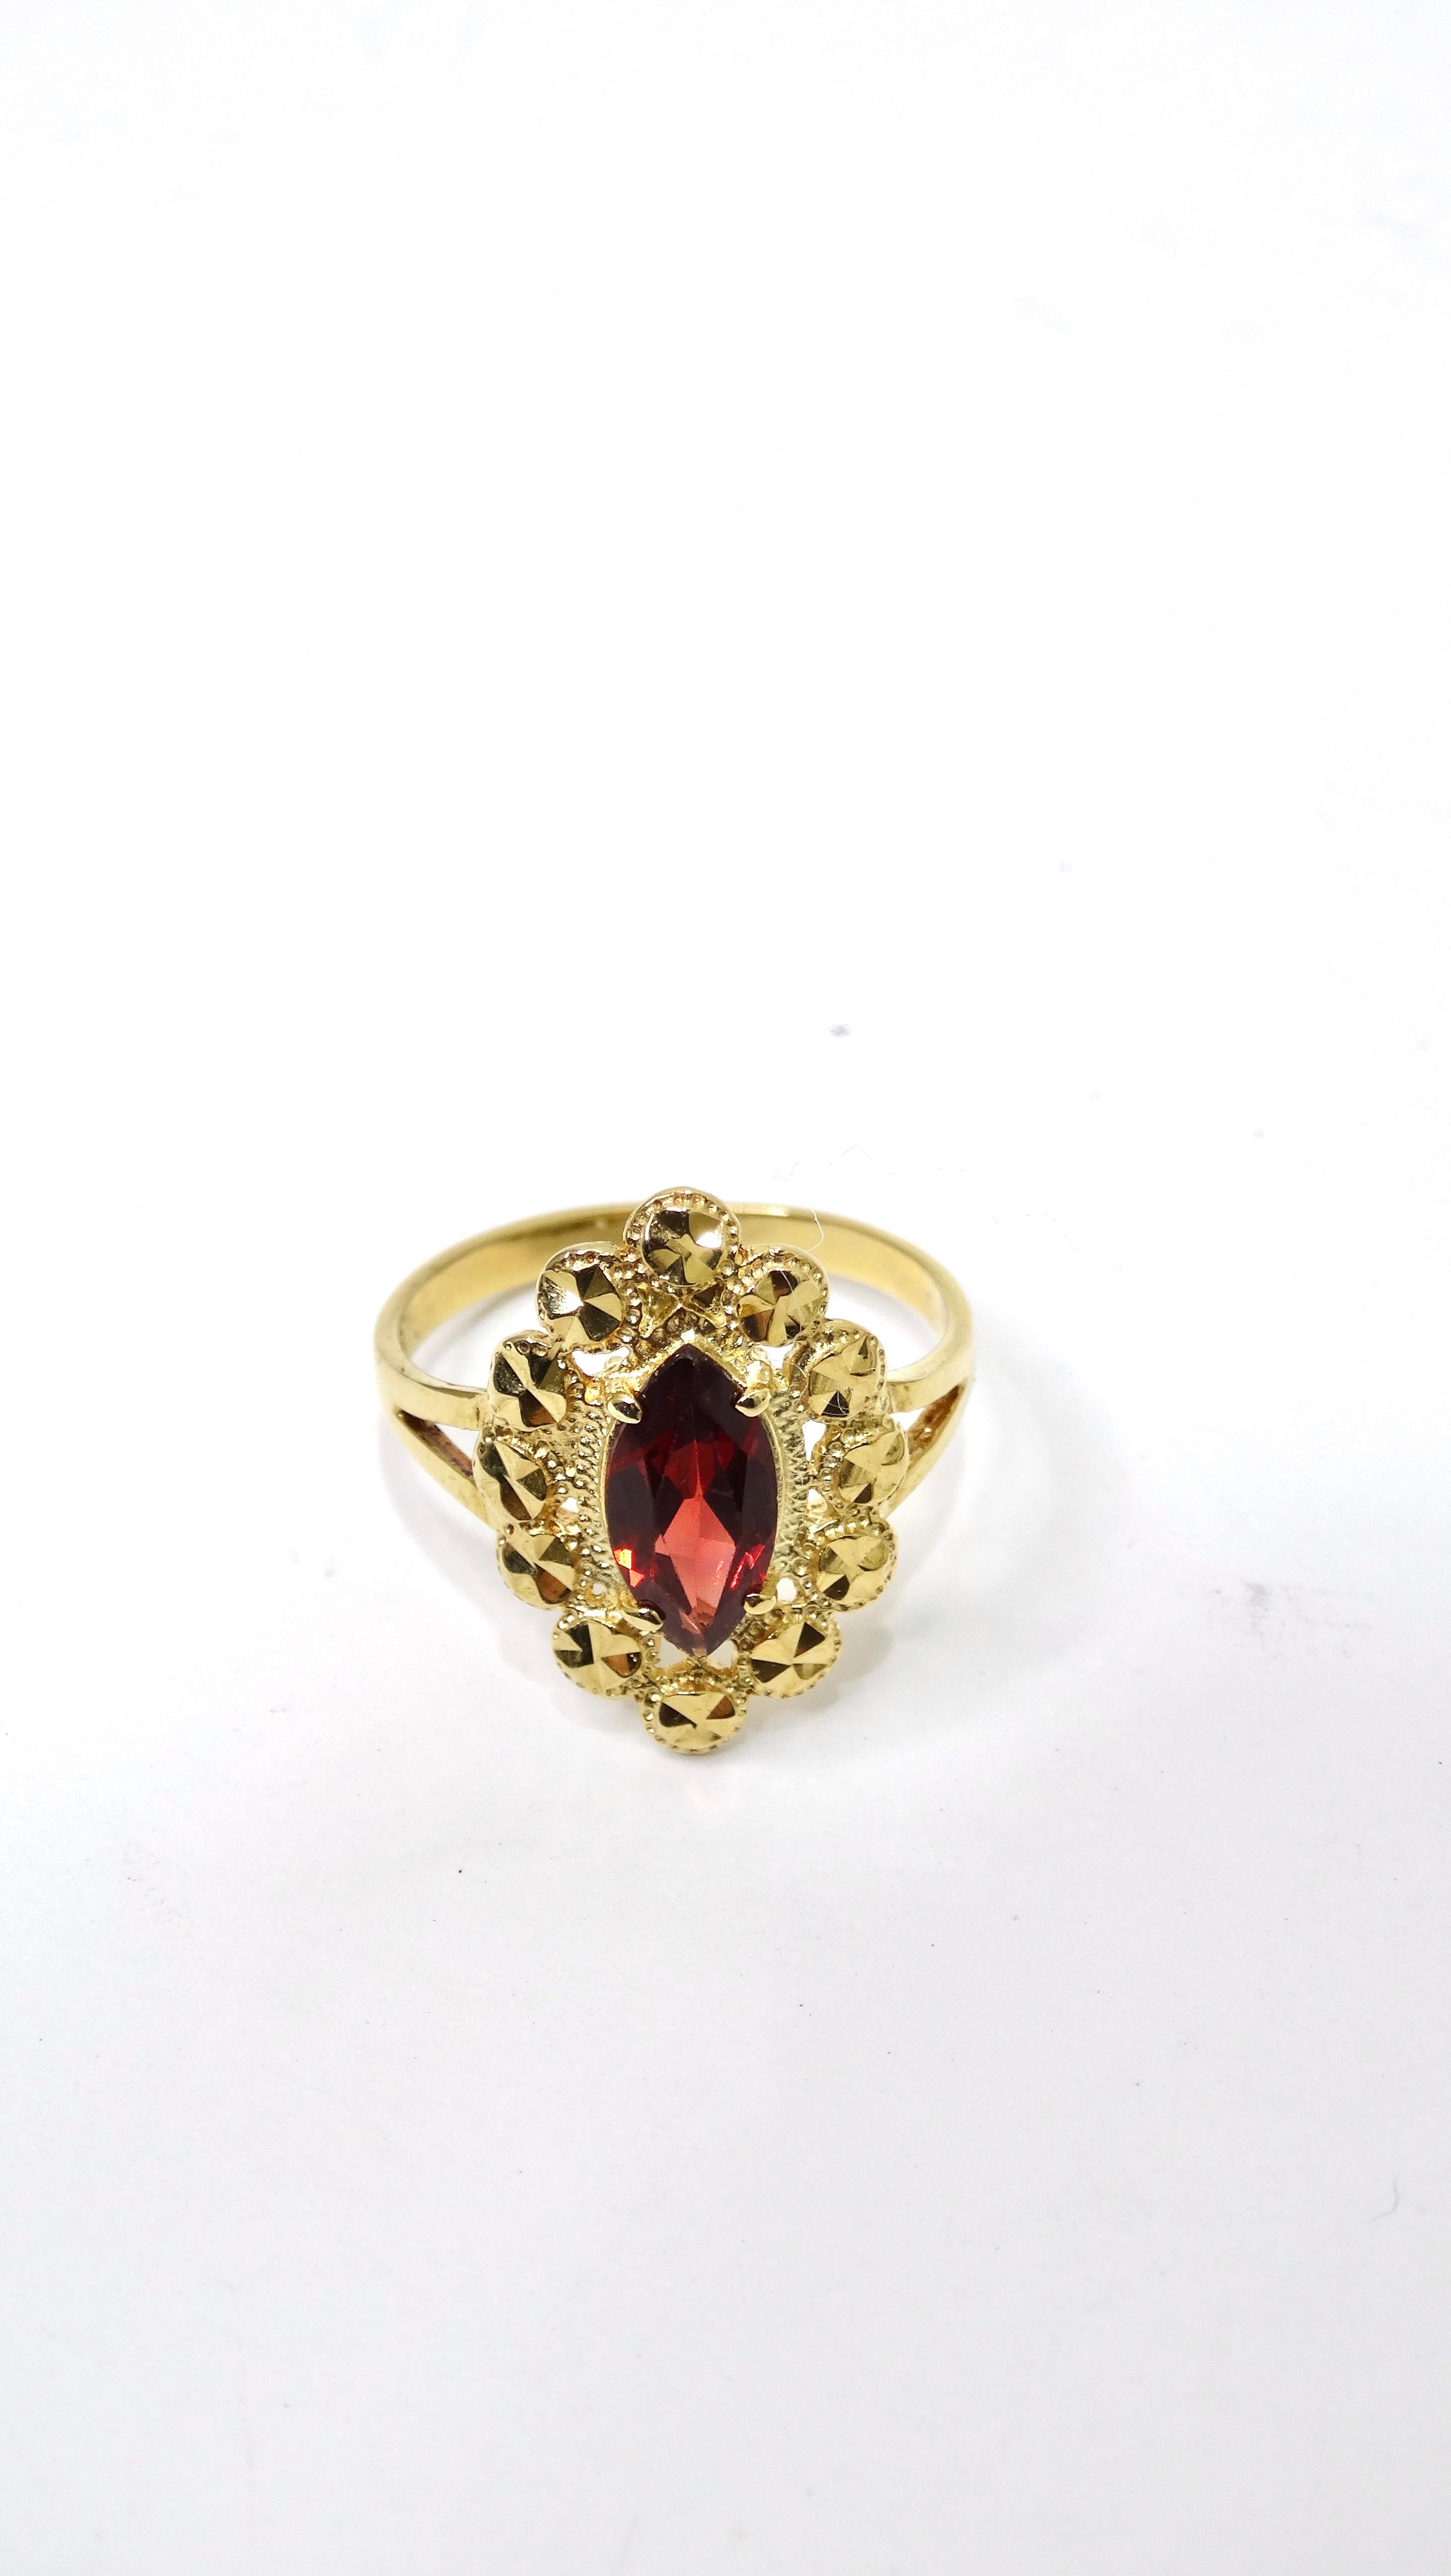 Garnet Marquise Cut and 14k Gold Ornate Ring In Excellent Condition For Sale In Scottsdale, AZ